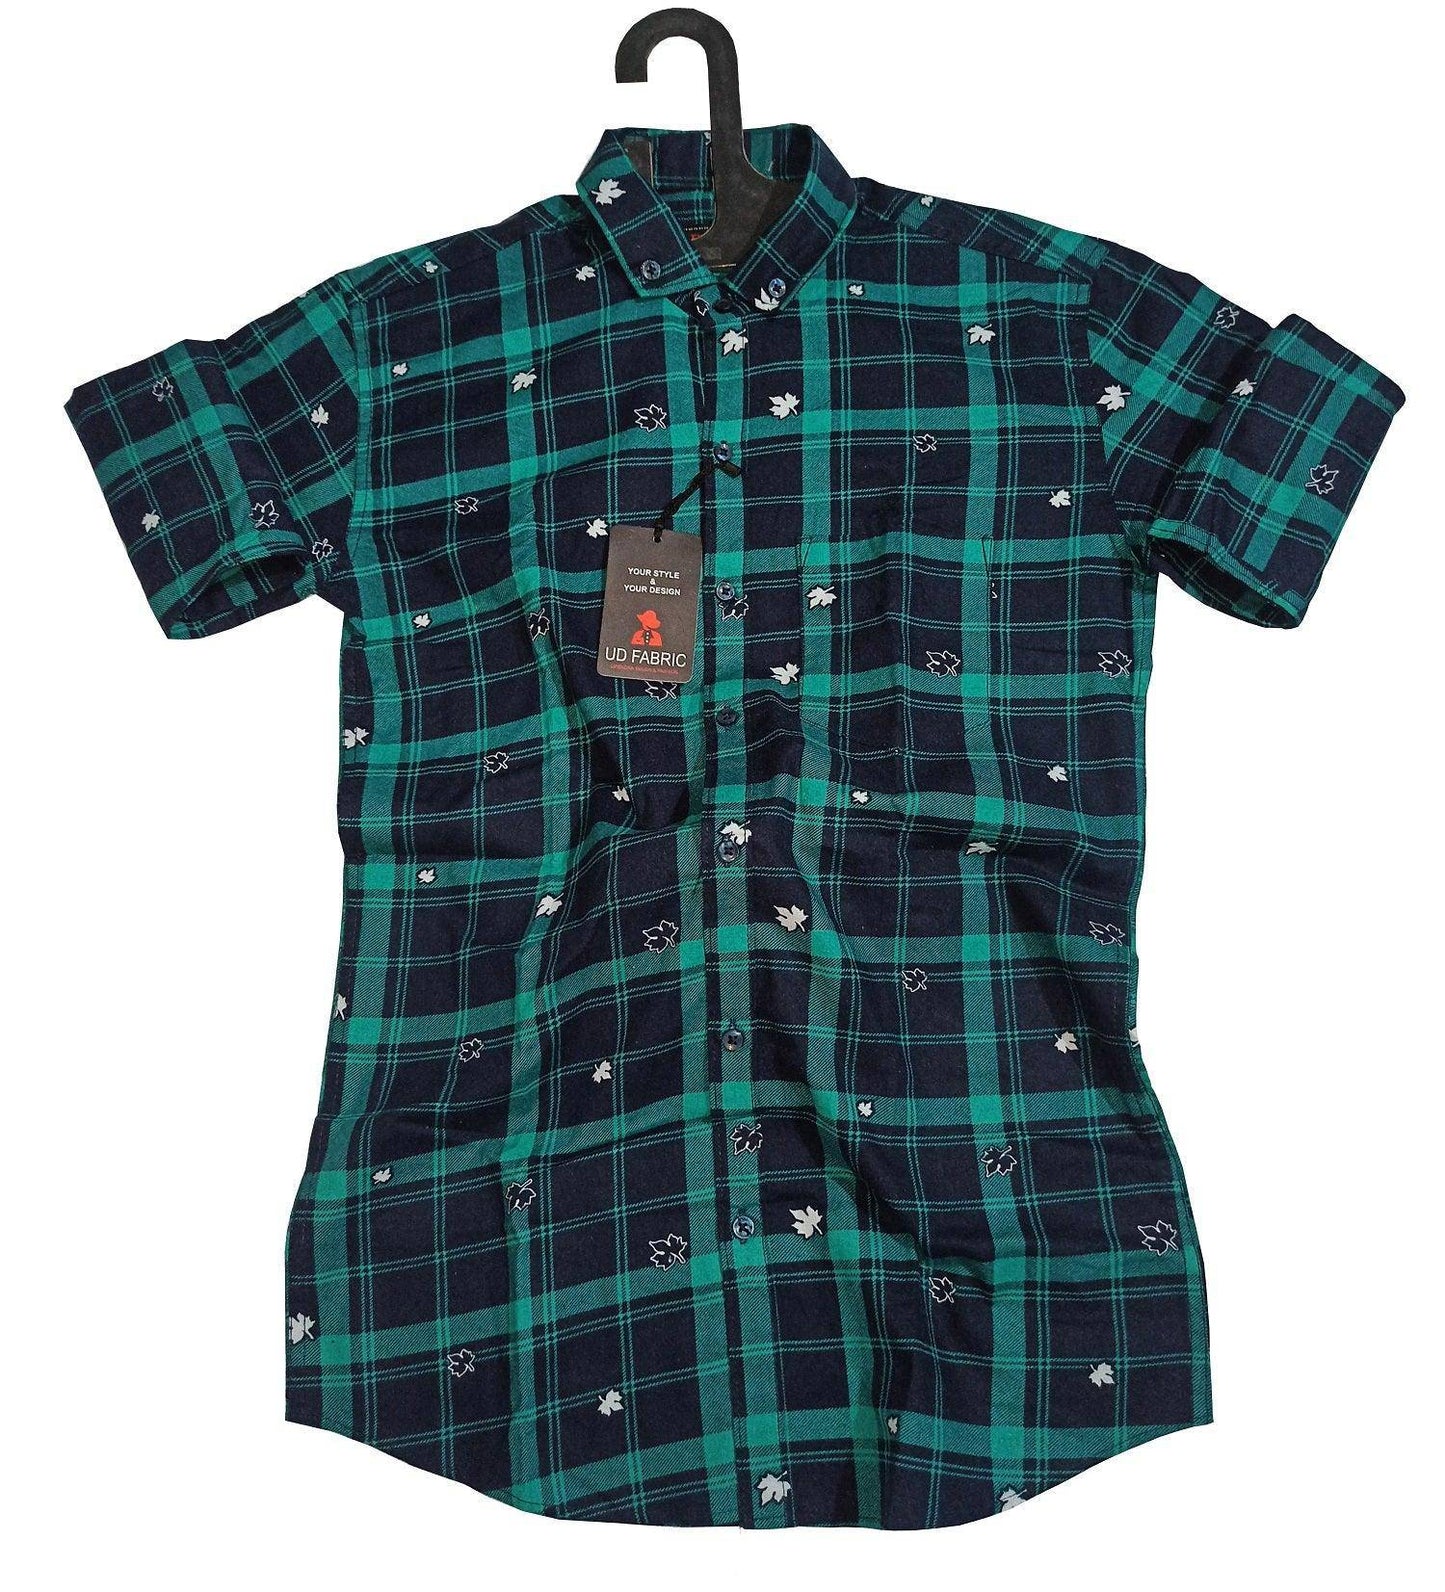 UD FABRIC Men’s Slim Fit Check Casual Shirt - Green - UD FABRIC - Your Style our Design